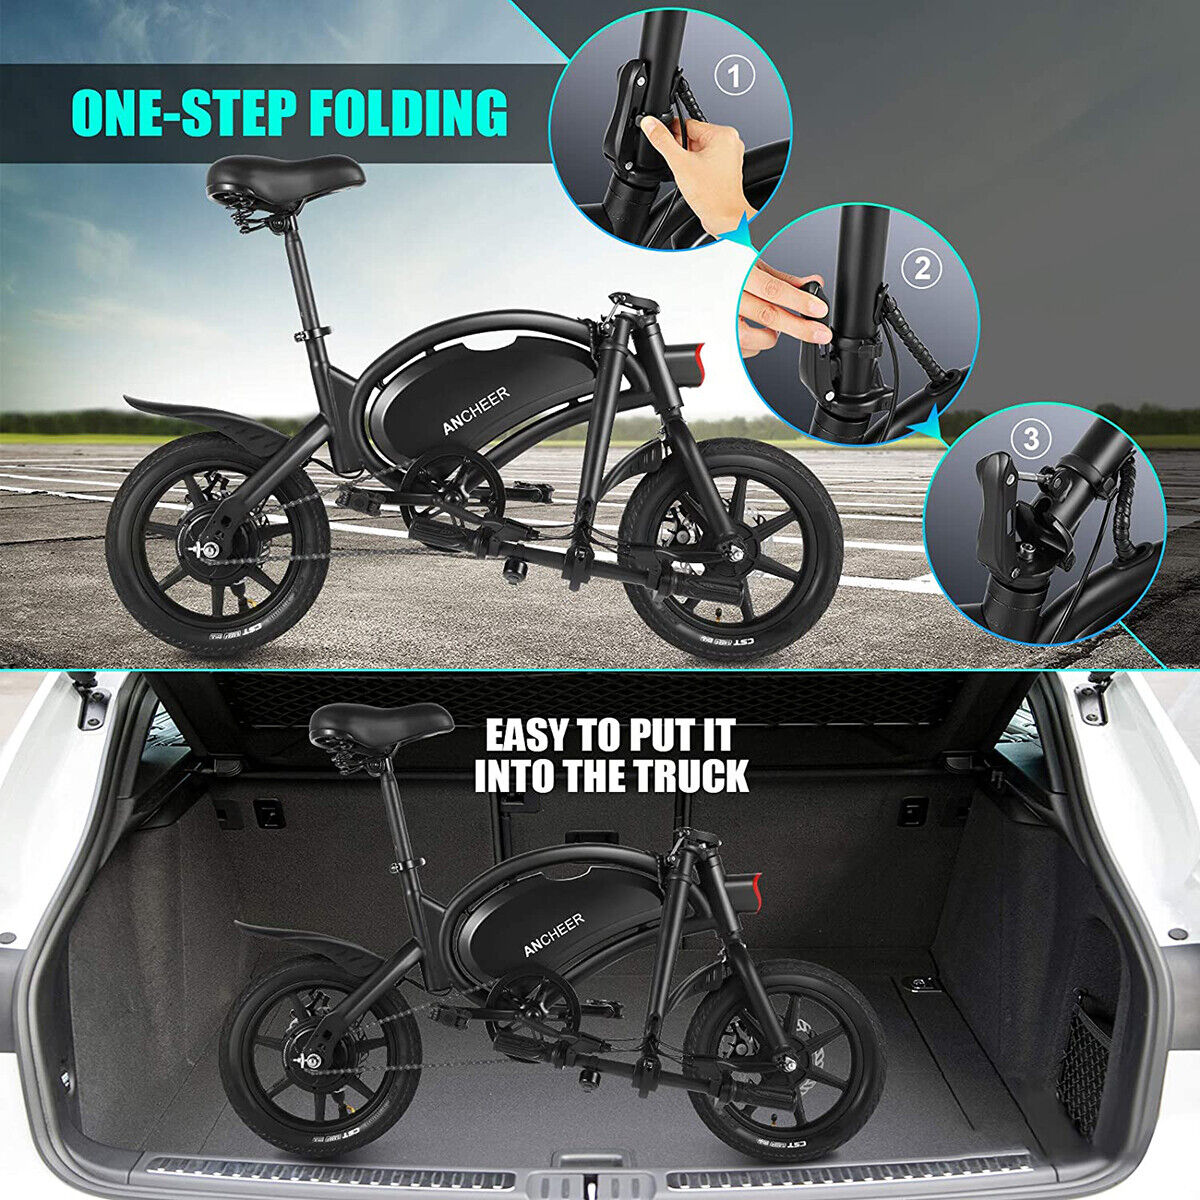 (Out of Stock) 500W Electric Bike Commuting Bicycle Folding City Ebike APP Control